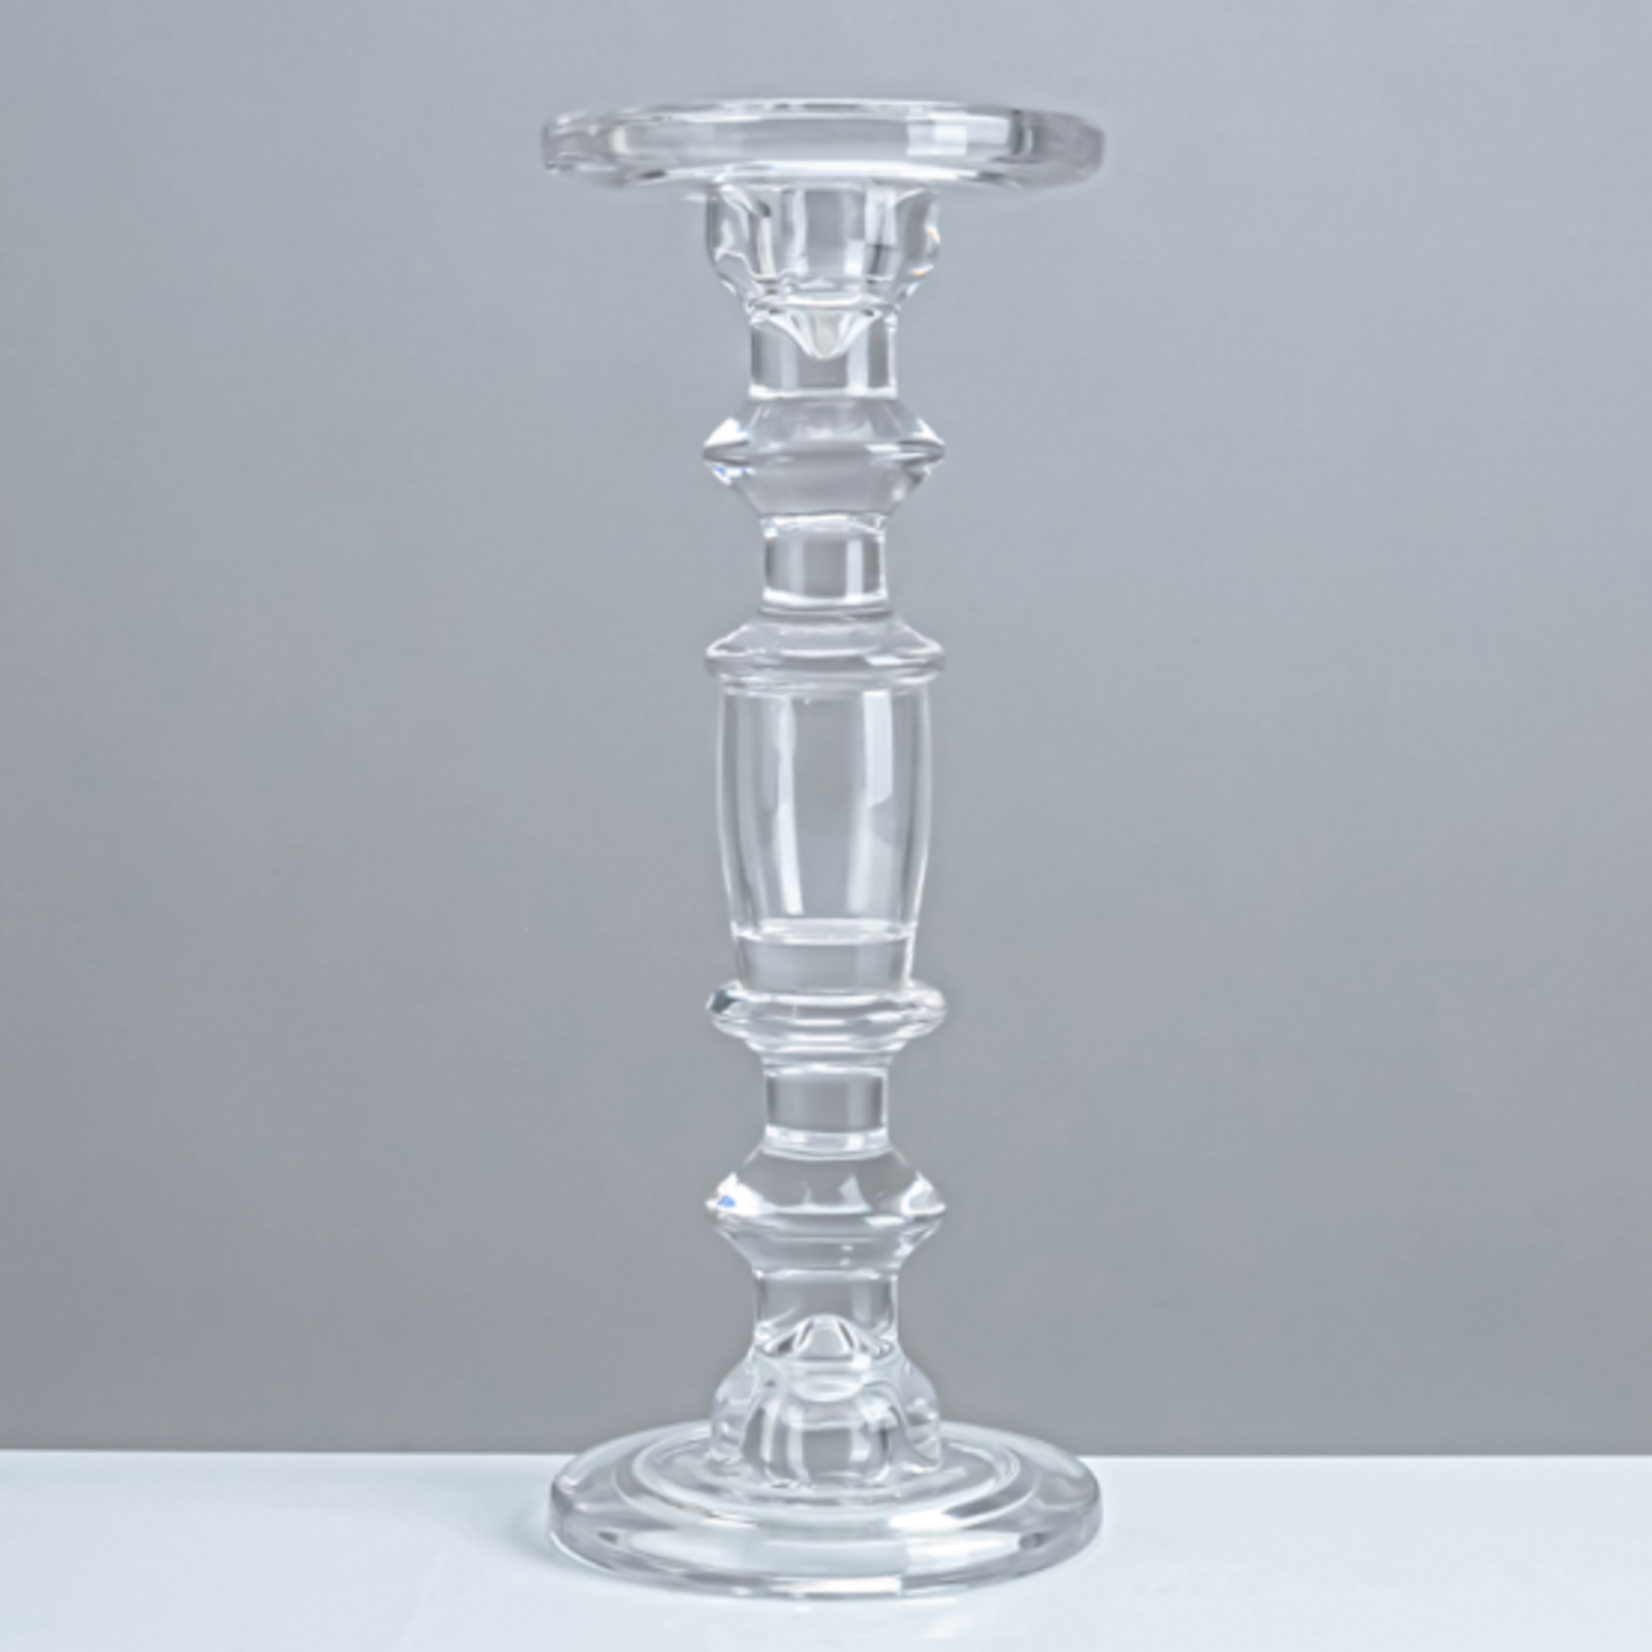 11.5”H X 4.5” CRYSTAL GLASS CANDLEHOLDER FOR PILLAR AND/OR TAPER